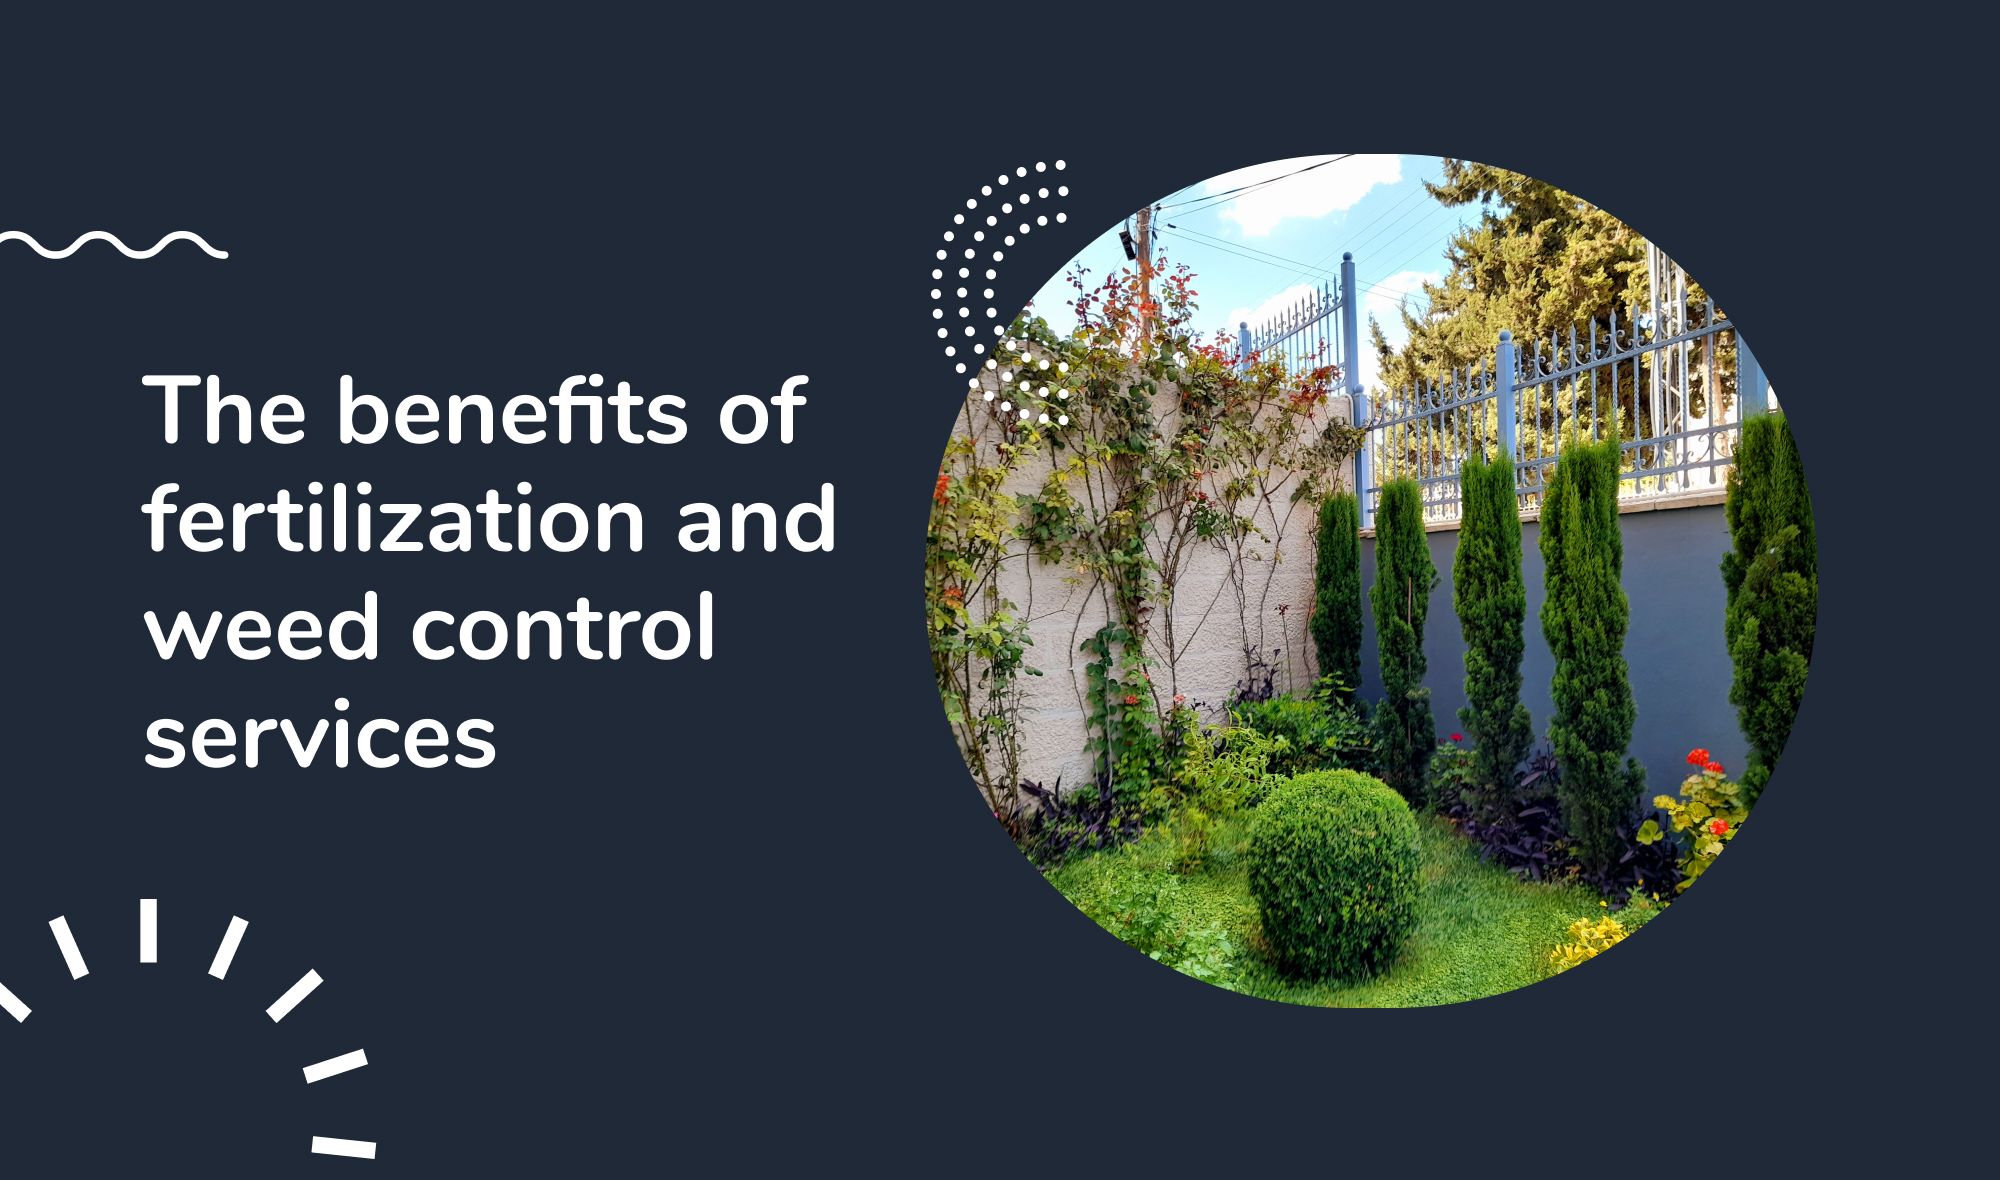 The benefits of fertilization and weed control services.